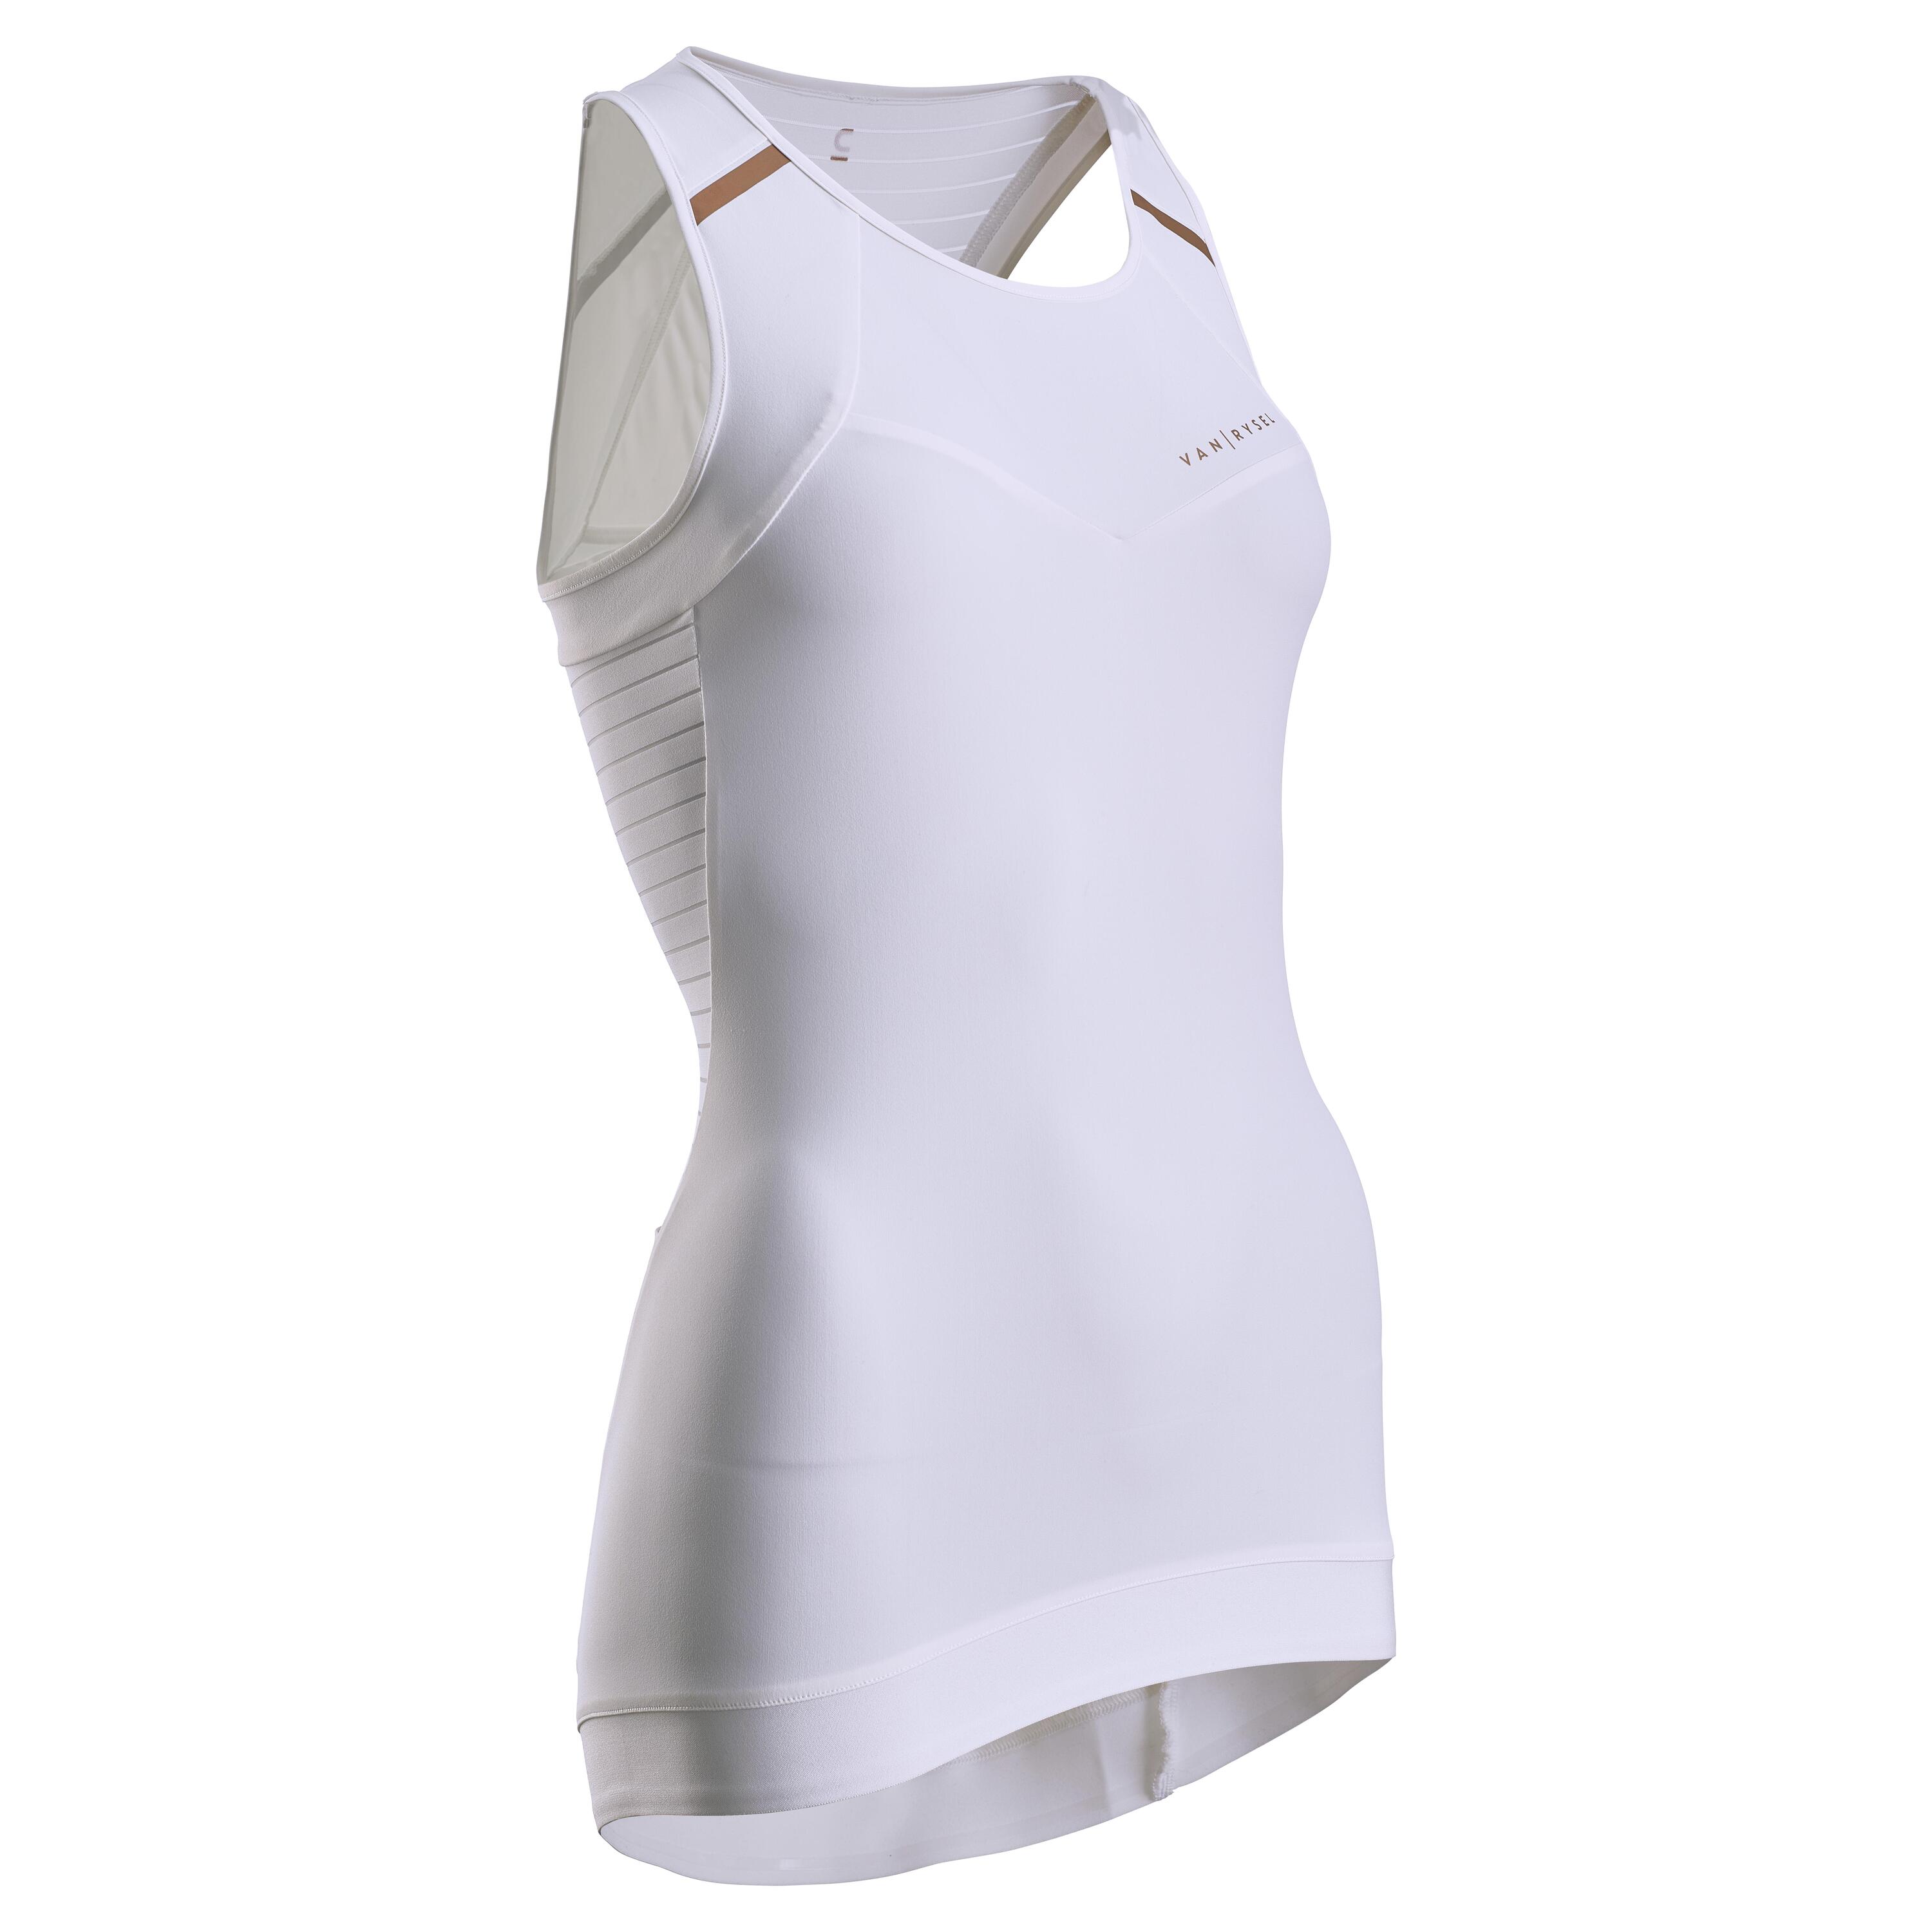 Women's Road Cycling Tank Top RCR - Off White 1/6